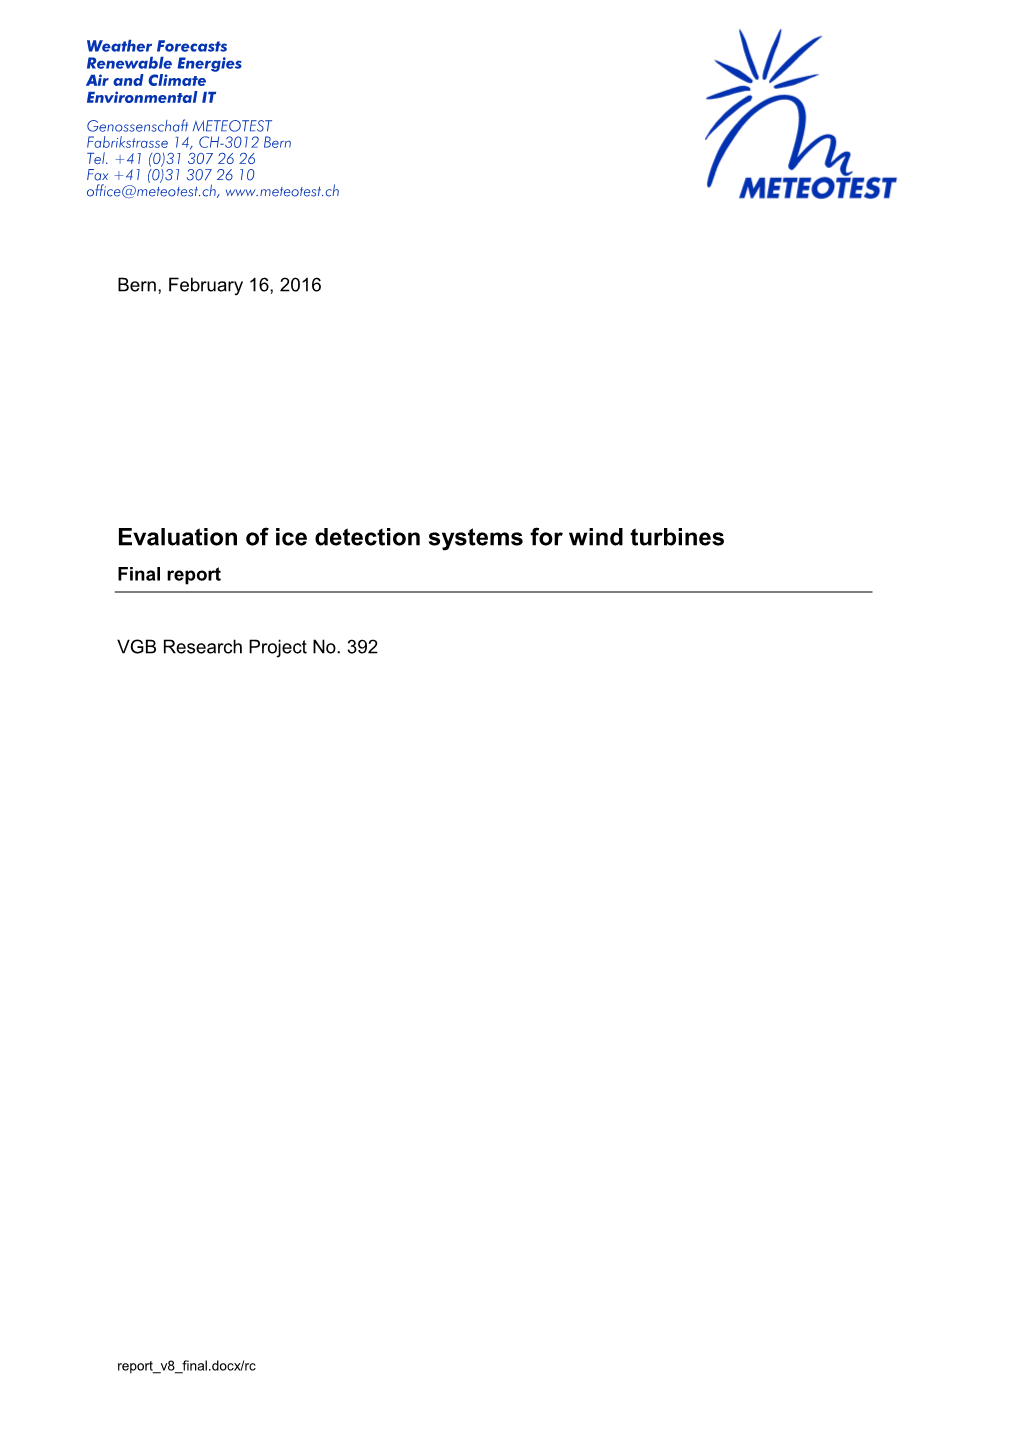 Evaluation of Ice Detection Systems for Wind Turbines Final Report